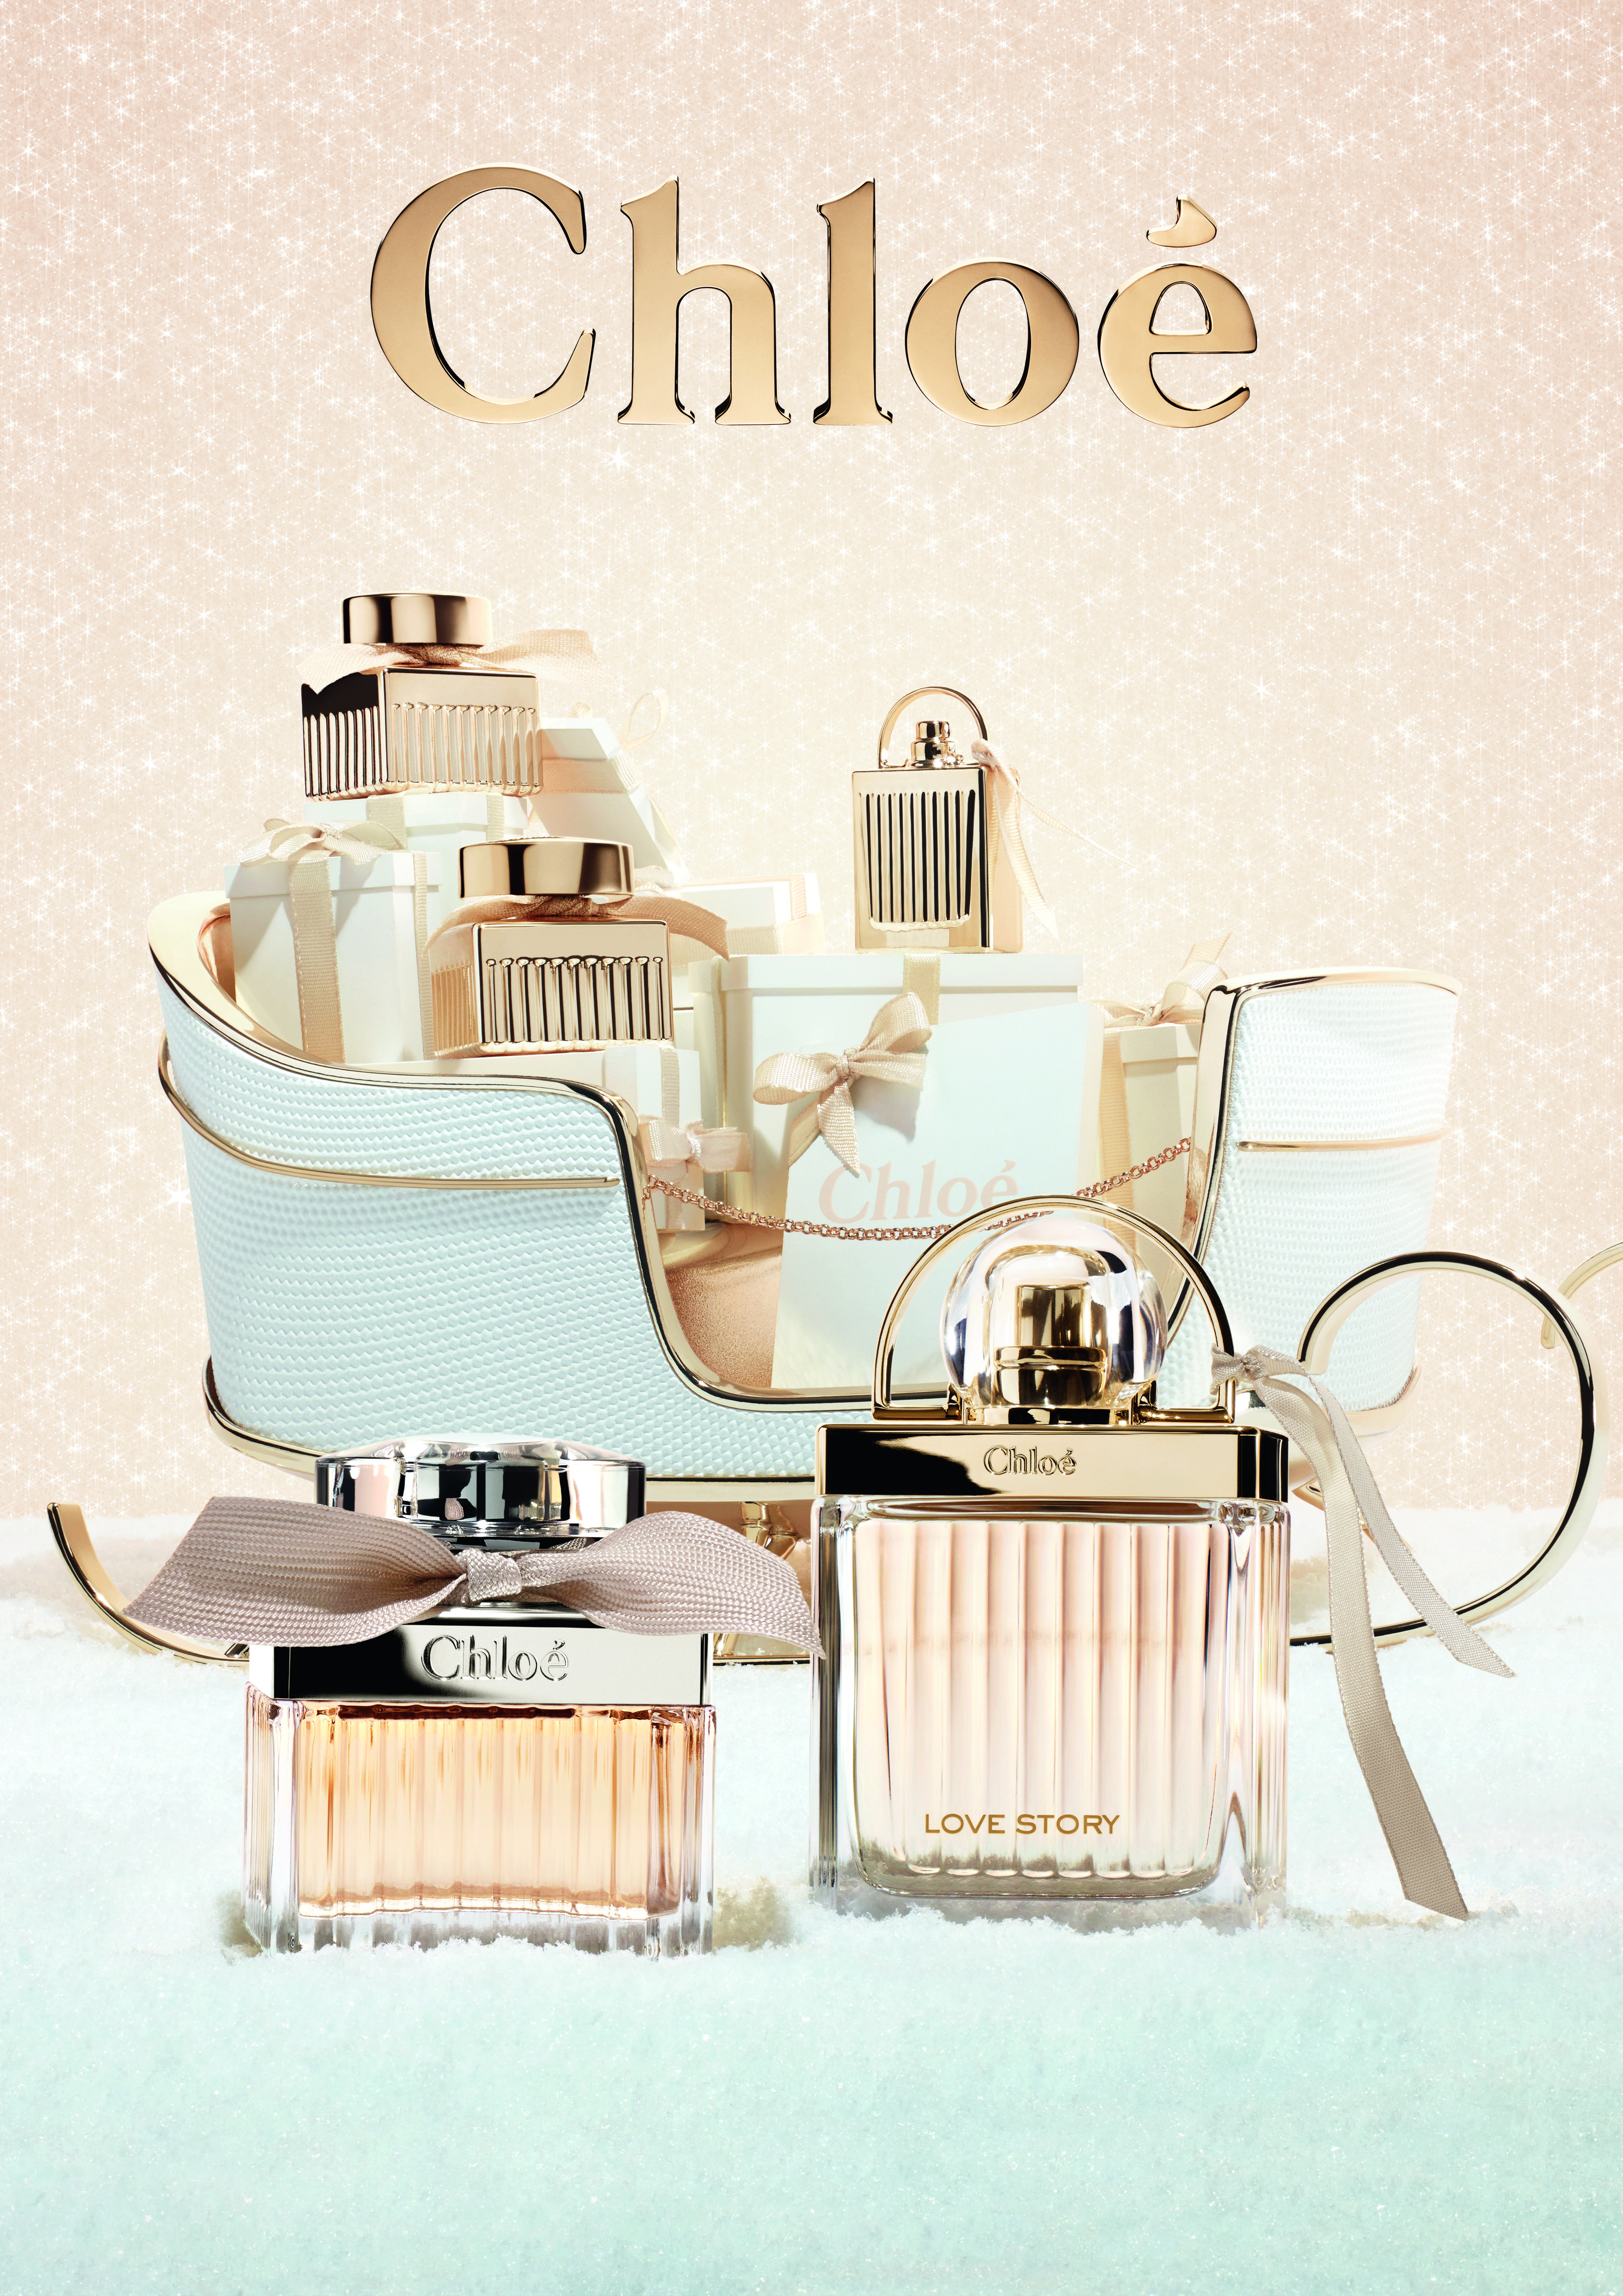 Coty gets animated with the unveiling of new Chloé ad visuals